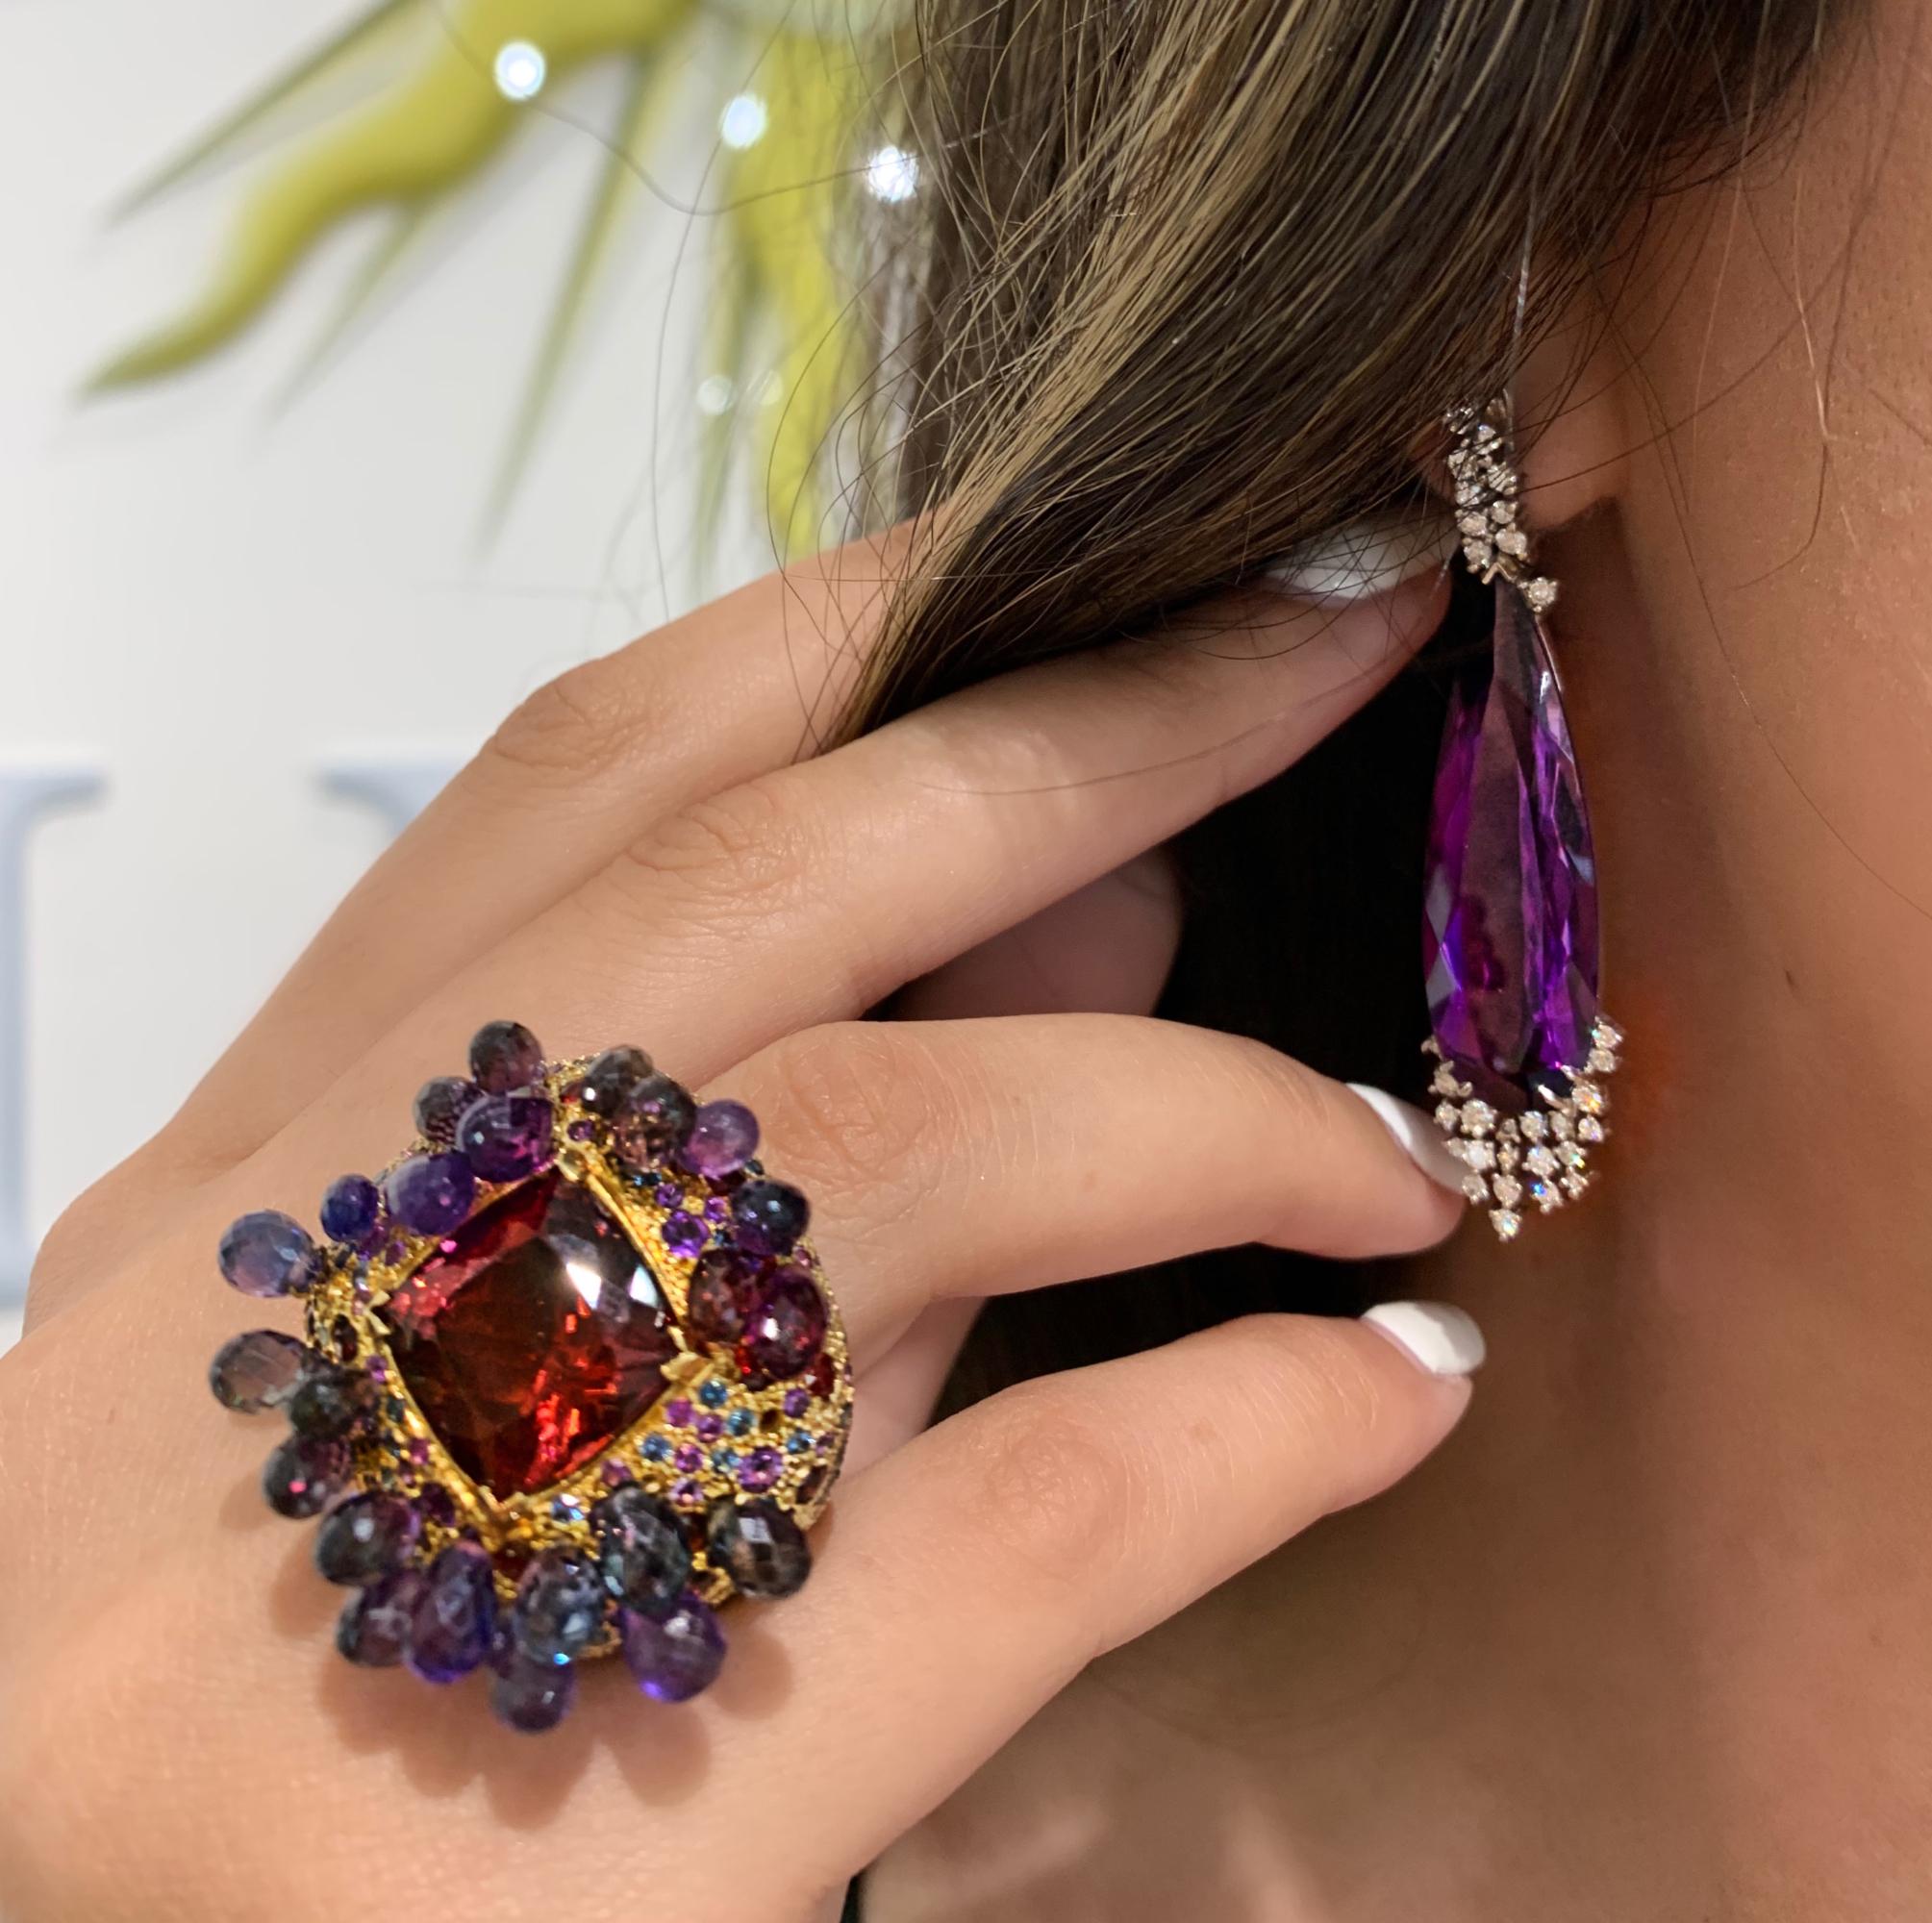 Specs: 18k yellow gold ring with 10.66 carats Wine Red Tourmaline, 29.29 carats Purple, Green and Blue Sapphire Briolette, .15 carats Amethyst, .39 carats Garnet, .64 carats Blue and Purple Sapphire, and .44 carats Tsavorite. Legend has it that